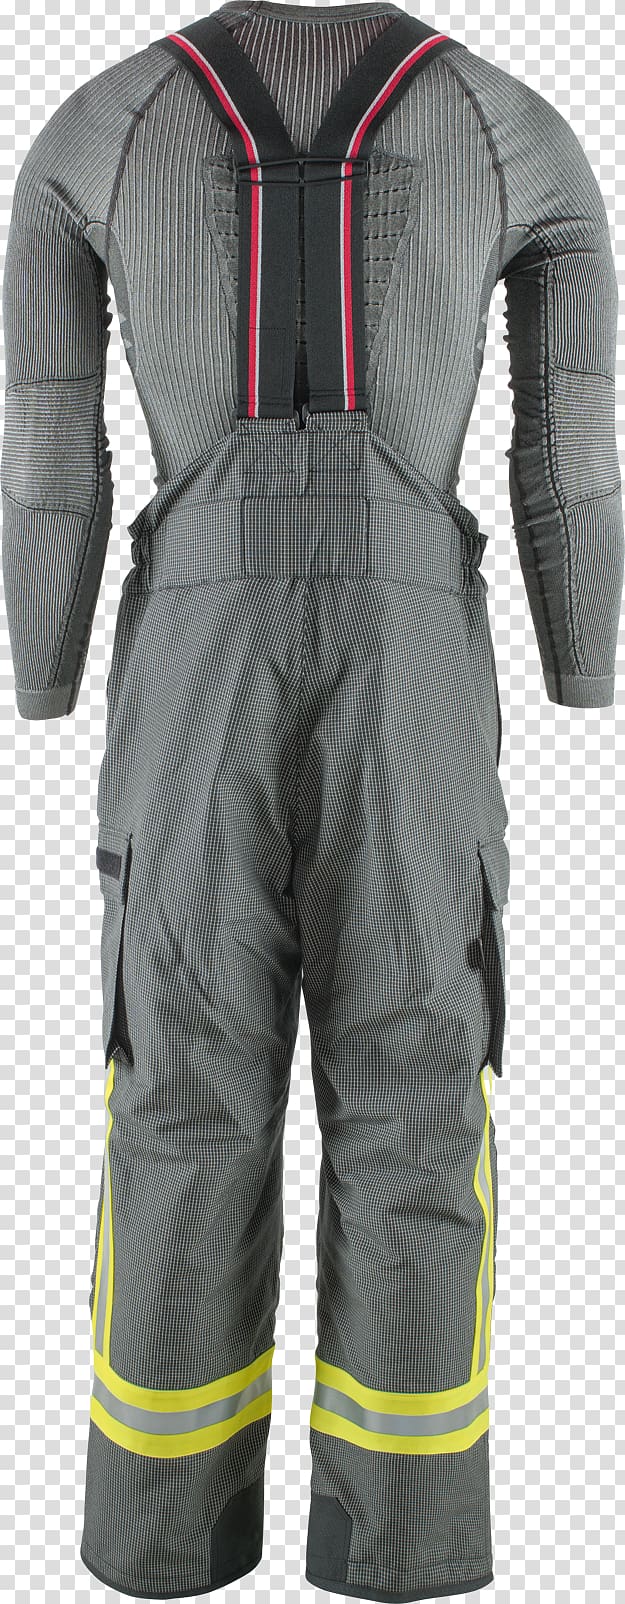 Hockey Protective Pants & Ski Shorts Overall Clothing Motorcycle Grey, motorcycle transparent background PNG clipart